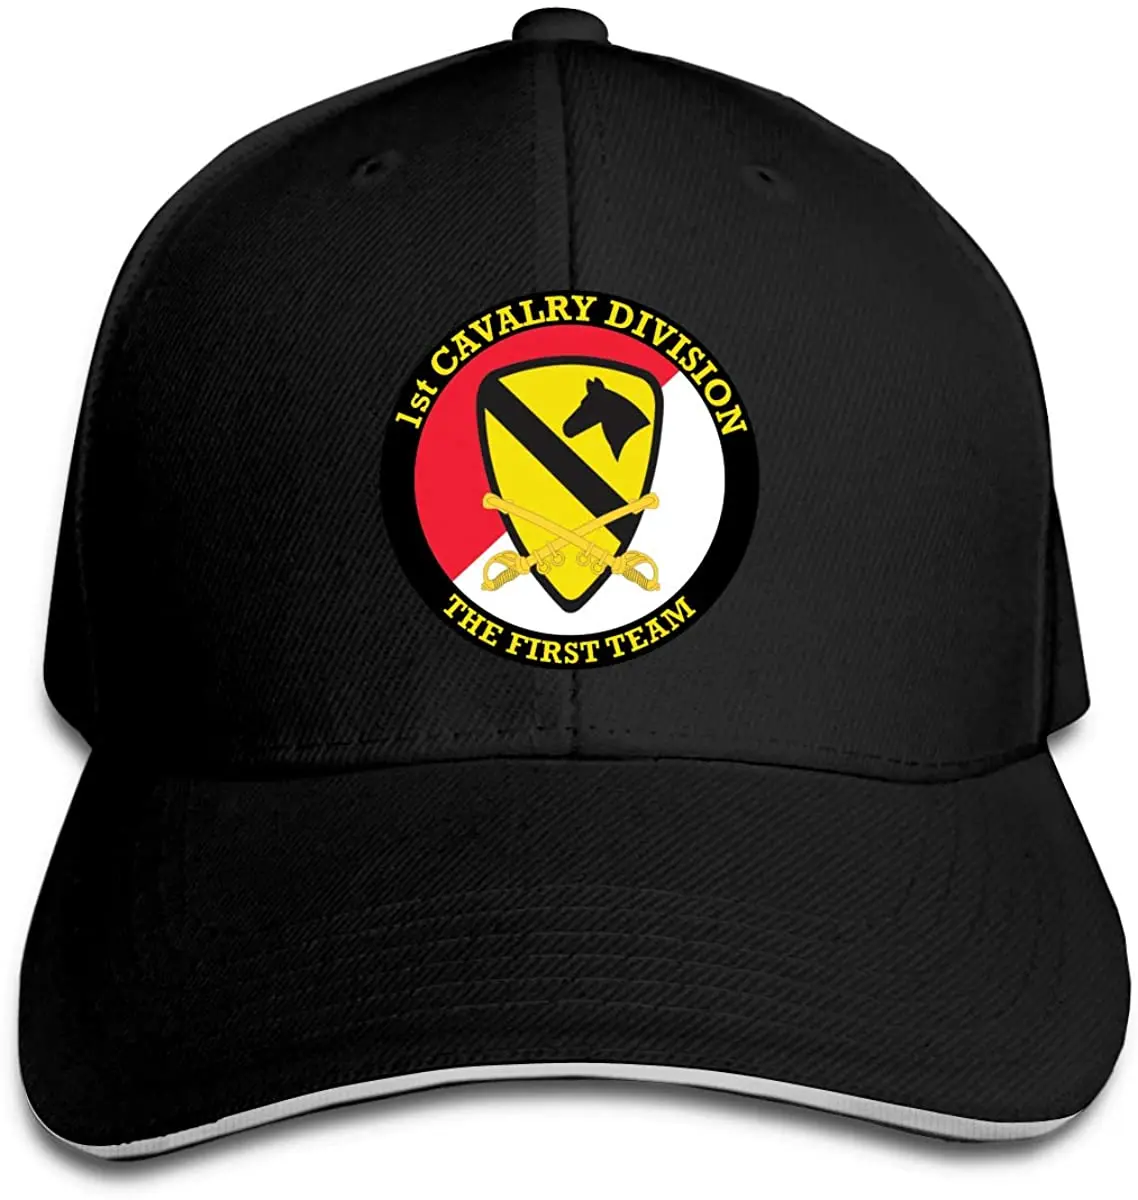 

1st Cavalry Division with Sabres Unisex Hats Trucker Hats Dad Baseball Hats Driver Cap